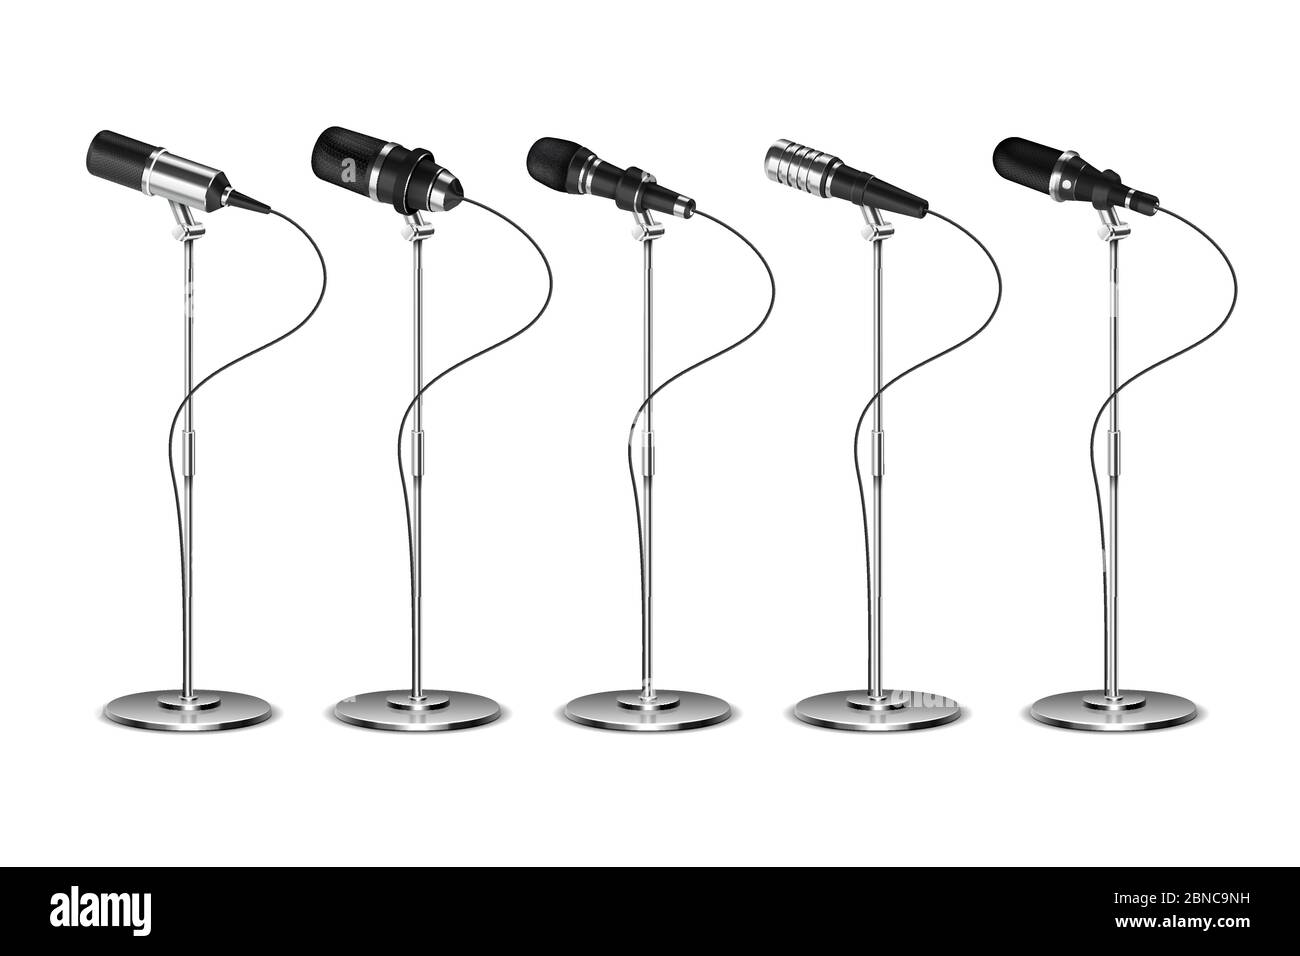 Microphones. Voice amplification audio equipment. Broadcast, concert and interview microphone on stand. Isolated vector set. Illustration of mic for speech, microphone record Stock Vector